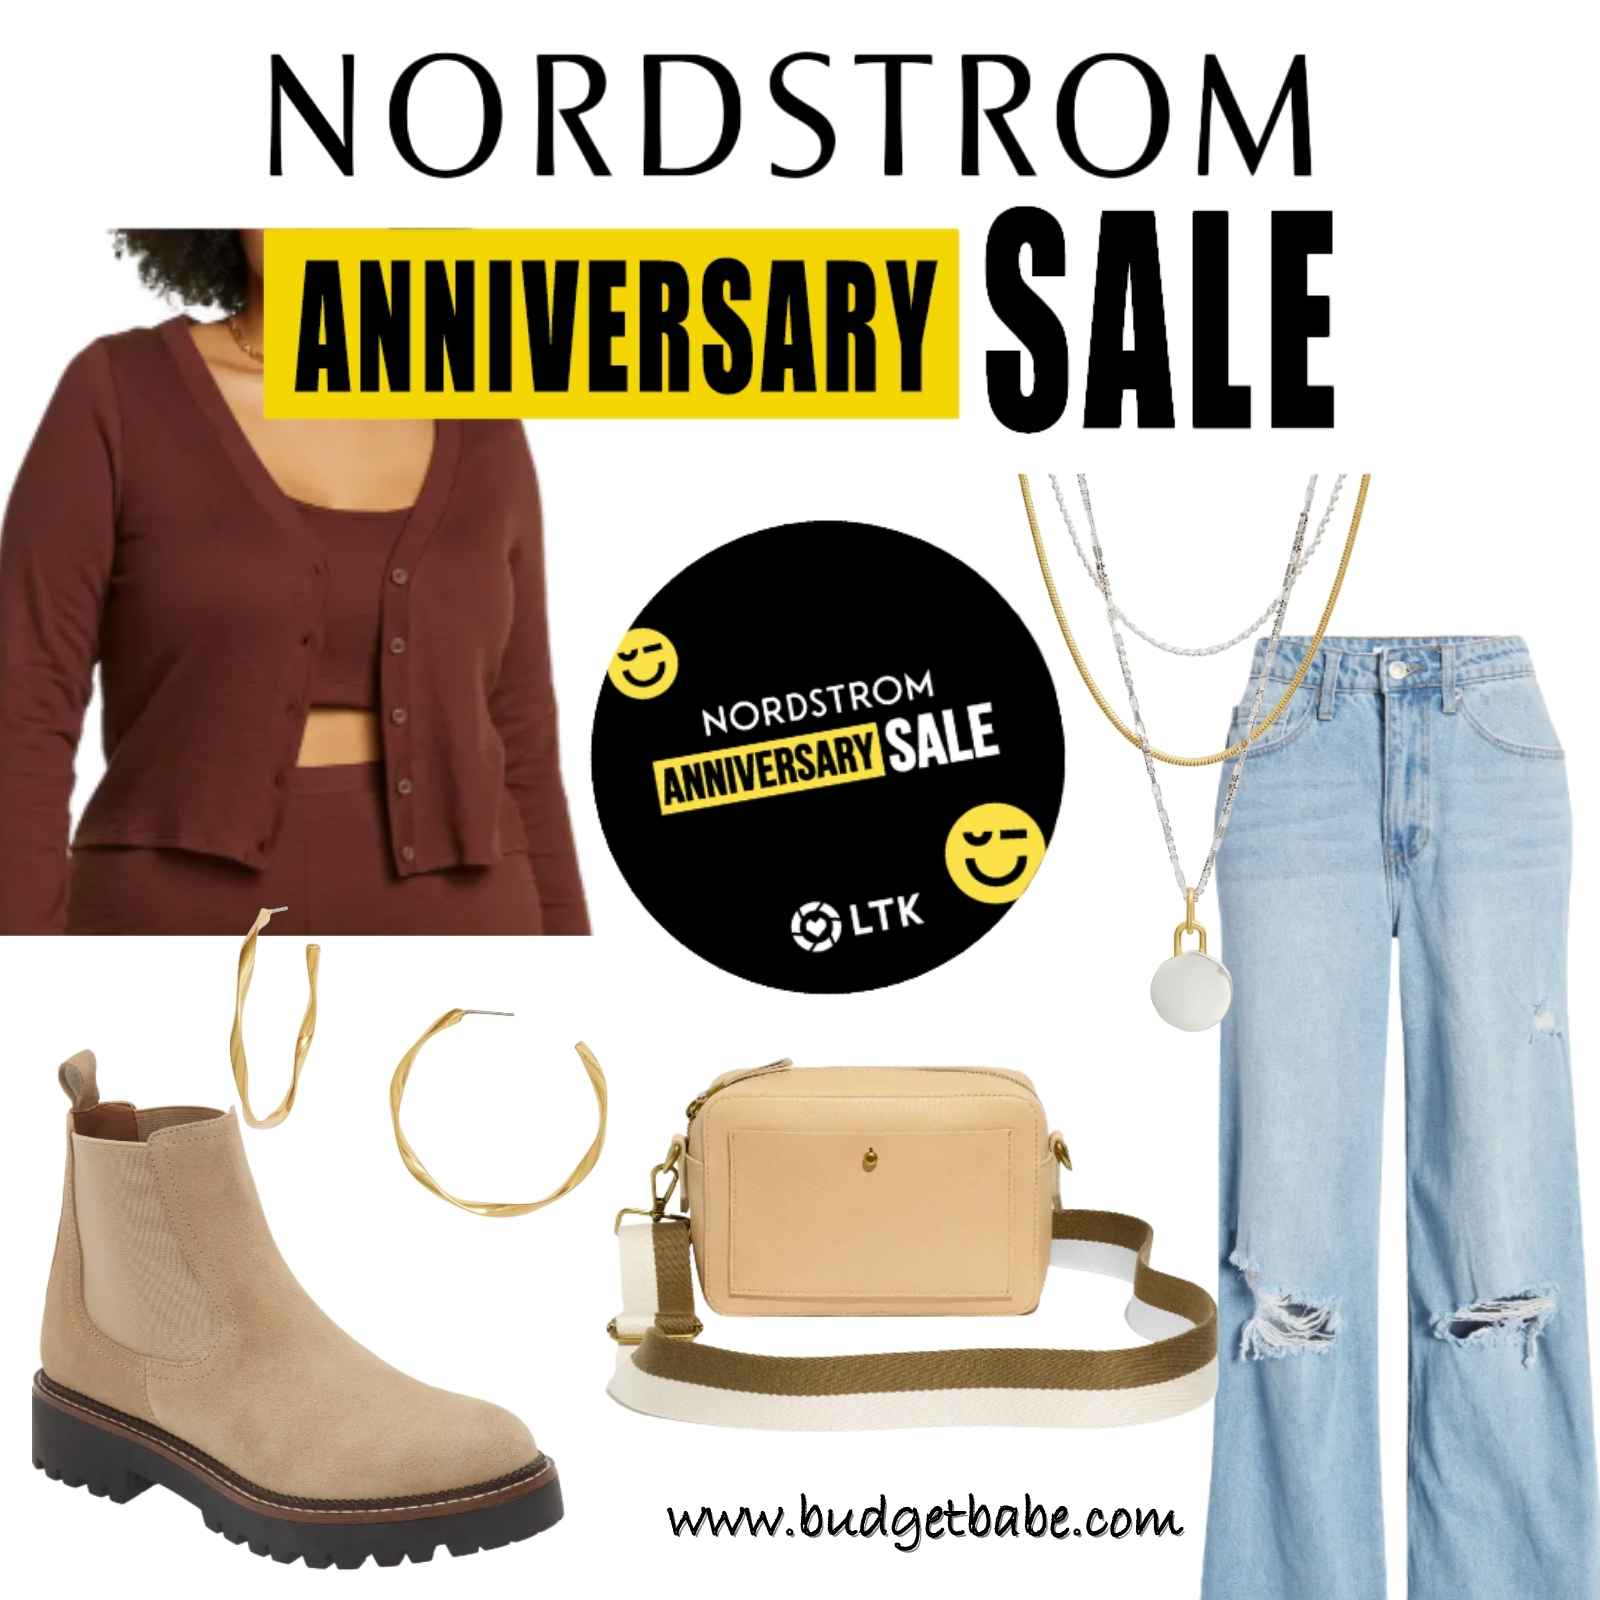 Outfit ideas from Nordstrom Anniversary Sale - cropped sweater set and wide leg jeans